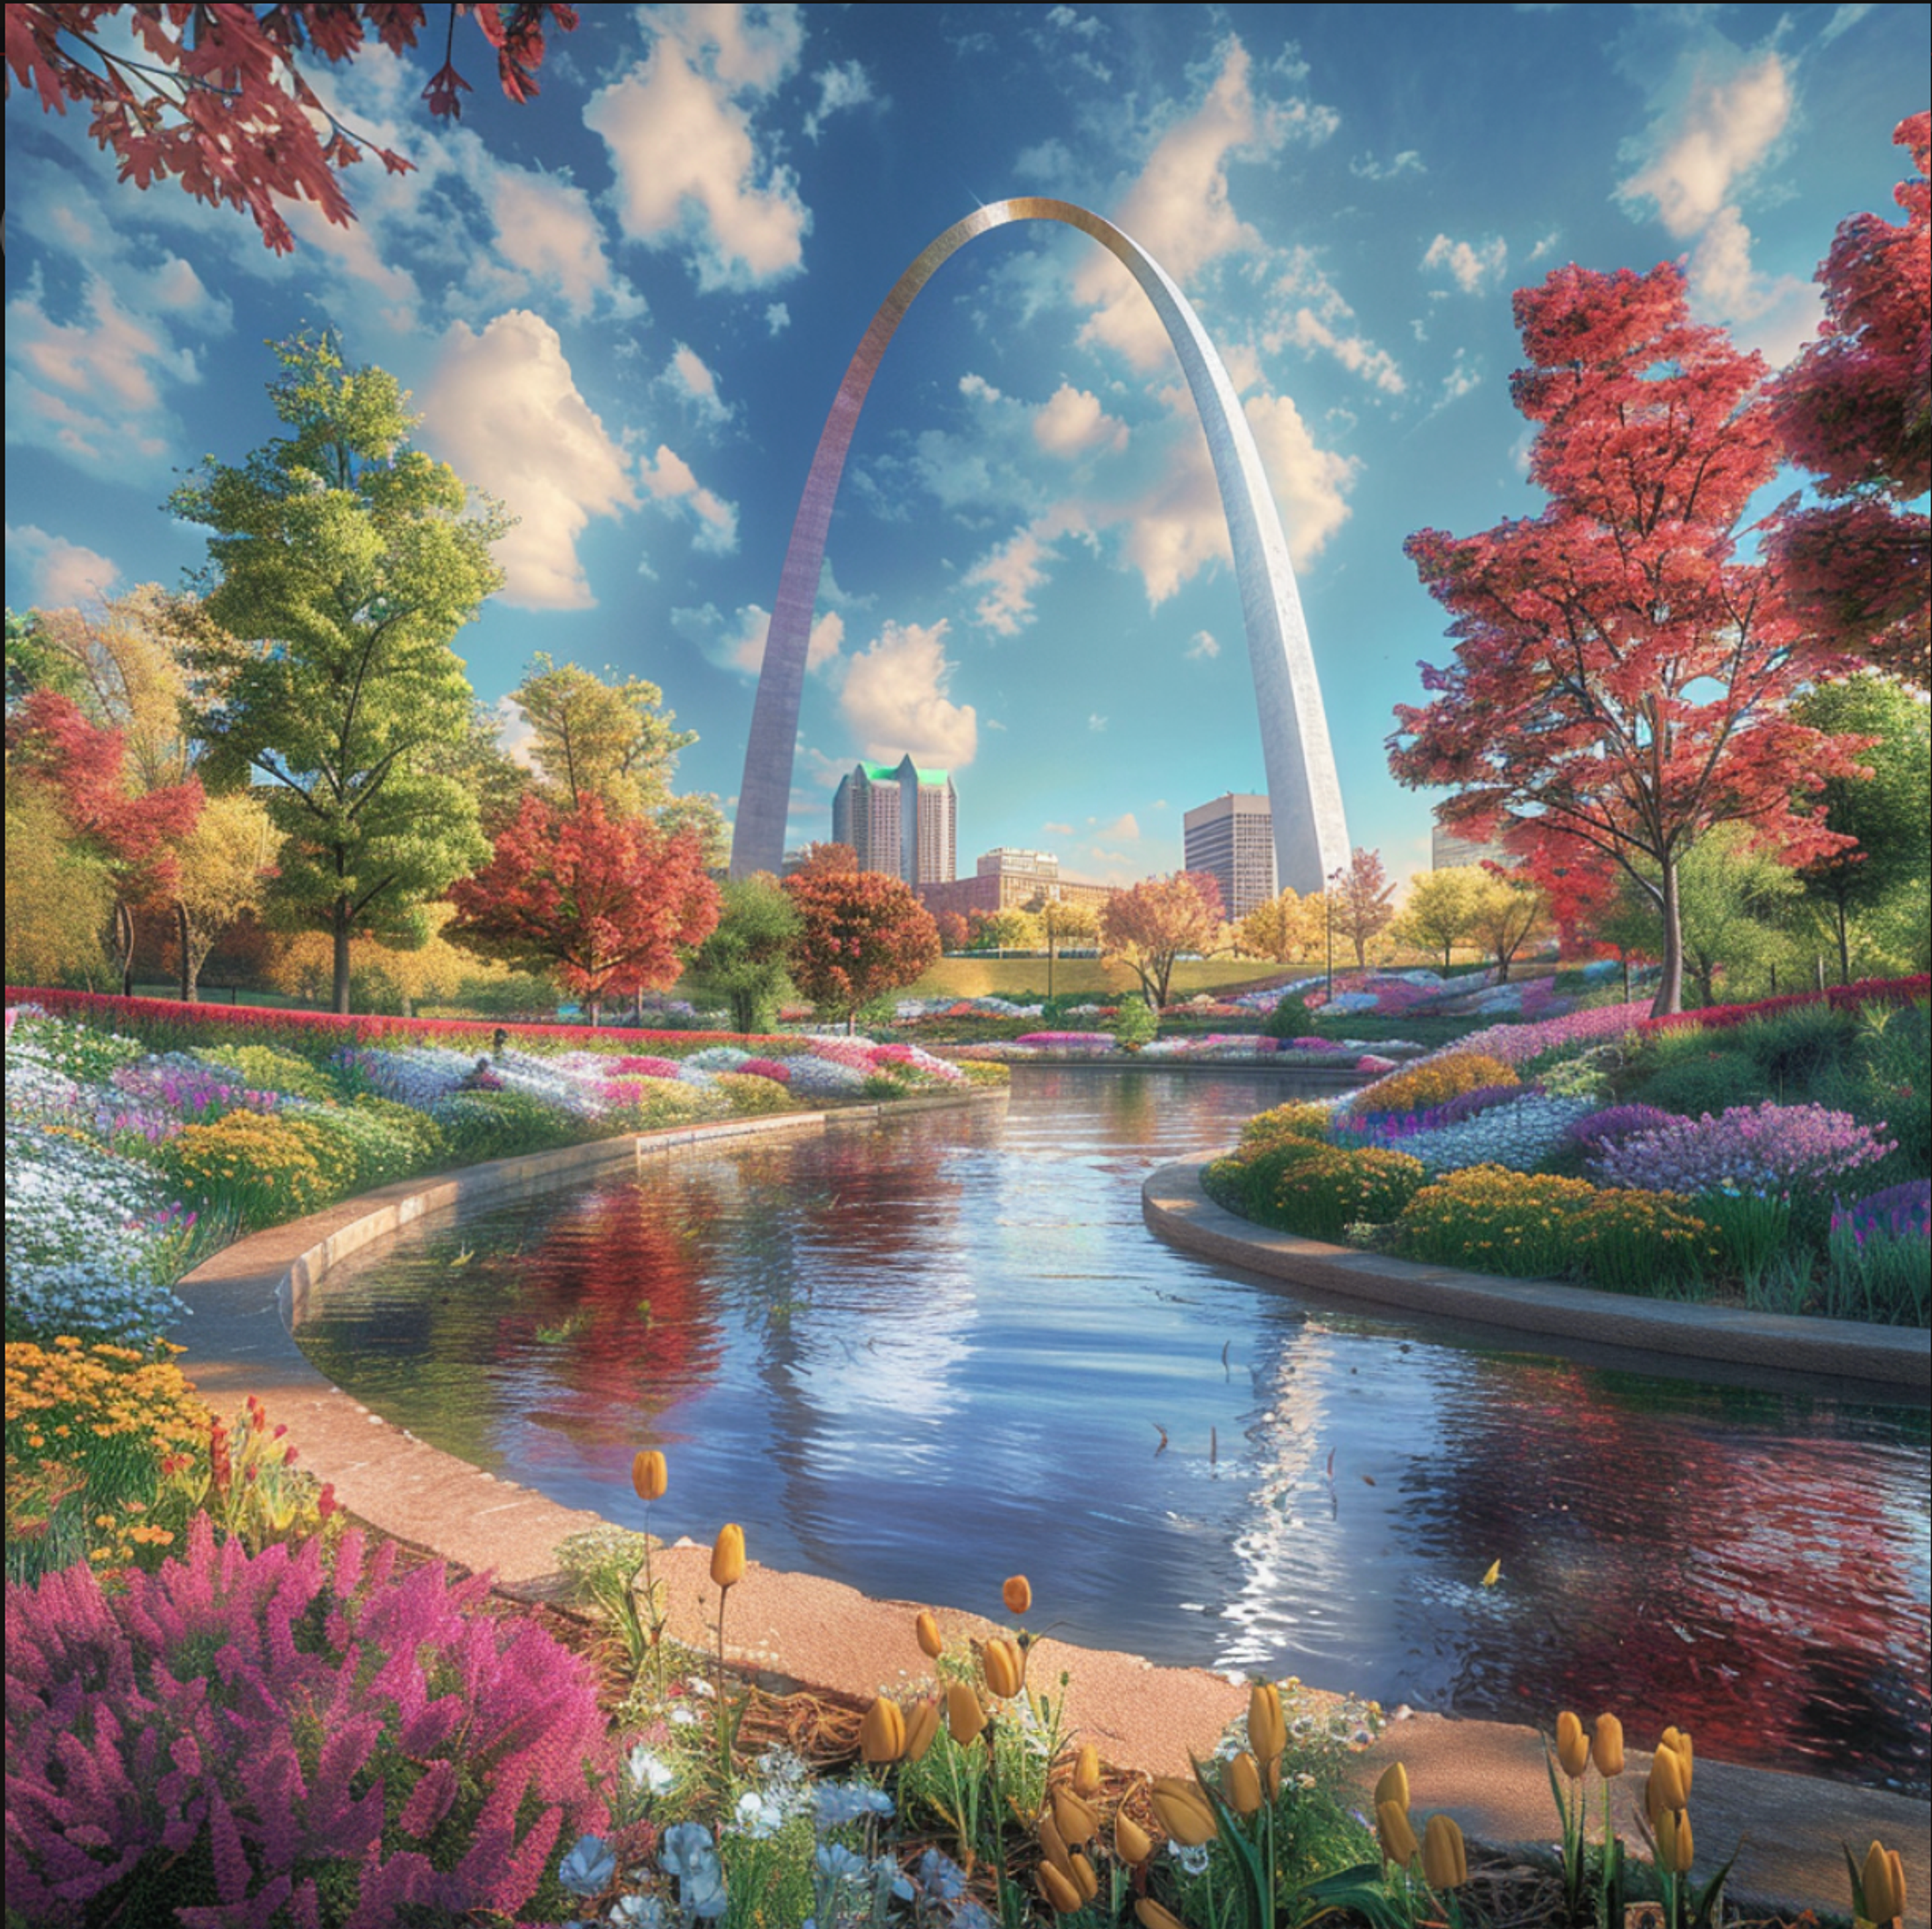 The iconic Gateway Arch in St. Louis, MO, creates a stunning backdrop to a vibrant park brimming with richly colored flowers and a meandering river, embodying the spirit of St. Louis and the joy of flower delivery services in the area.